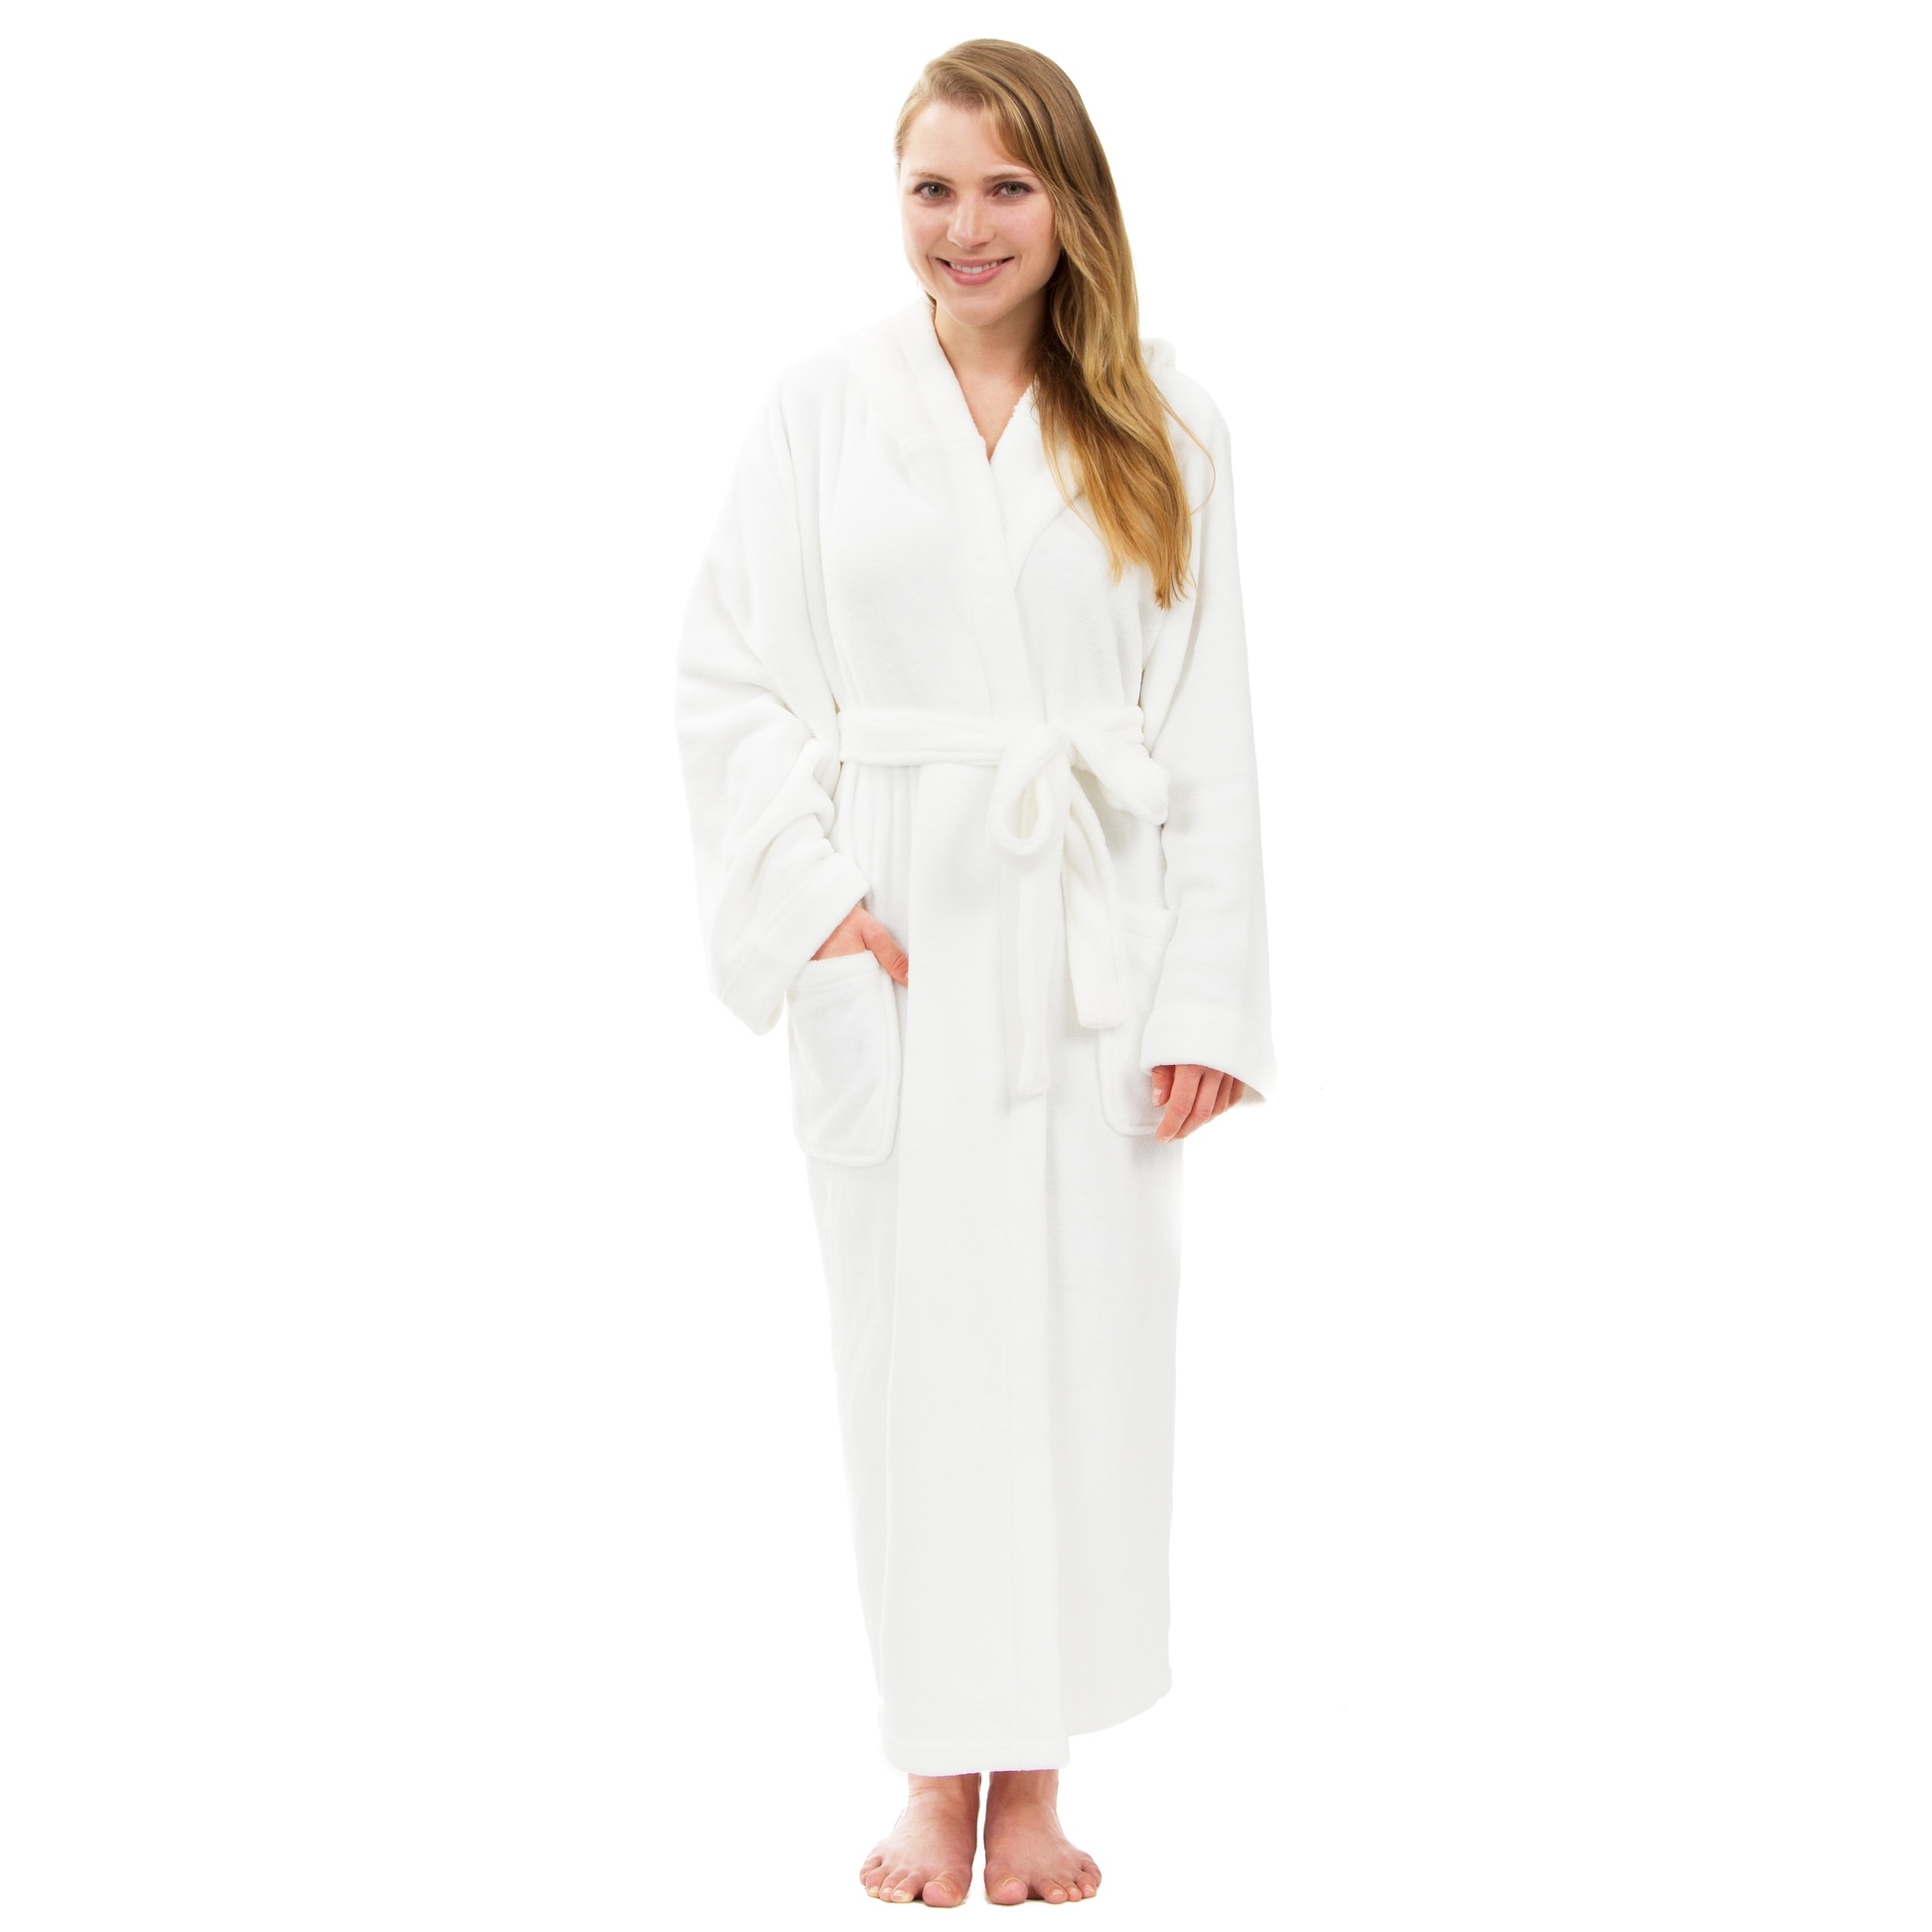 https://ak1.ostkcdn.com/images/products/is/images/direct/e5c6e671c8543b54affb8fcd9d3c1b4ed3300978/Women%27s-Hooded-Plush-Robe%2C-Long-Fleece-Solid-Robe.jpg